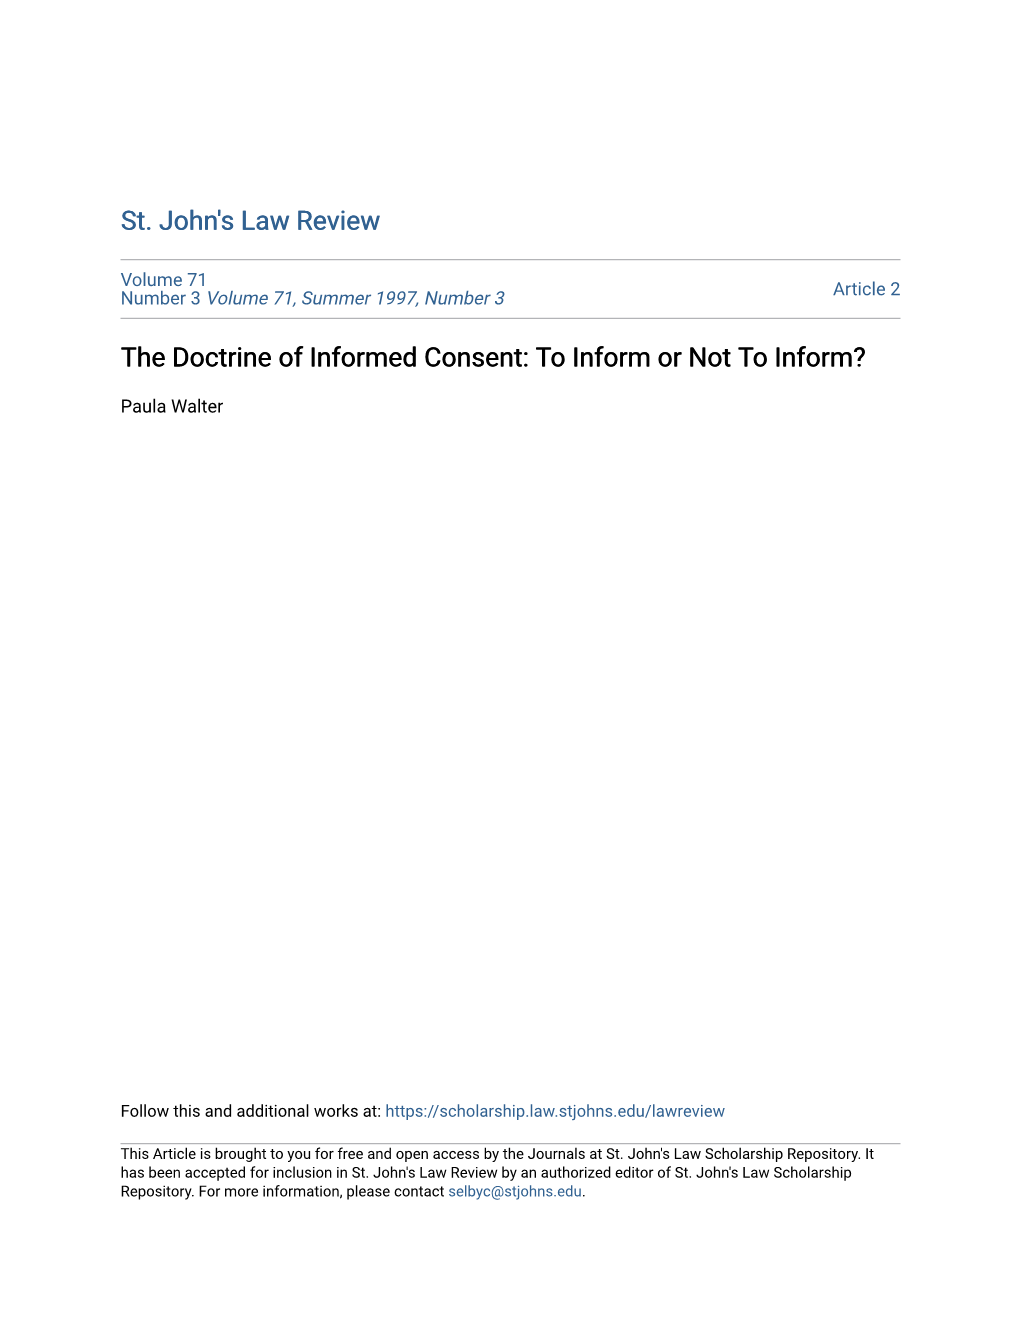 The Doctrine of Informed Consent: to Inform Or Not to Inform?